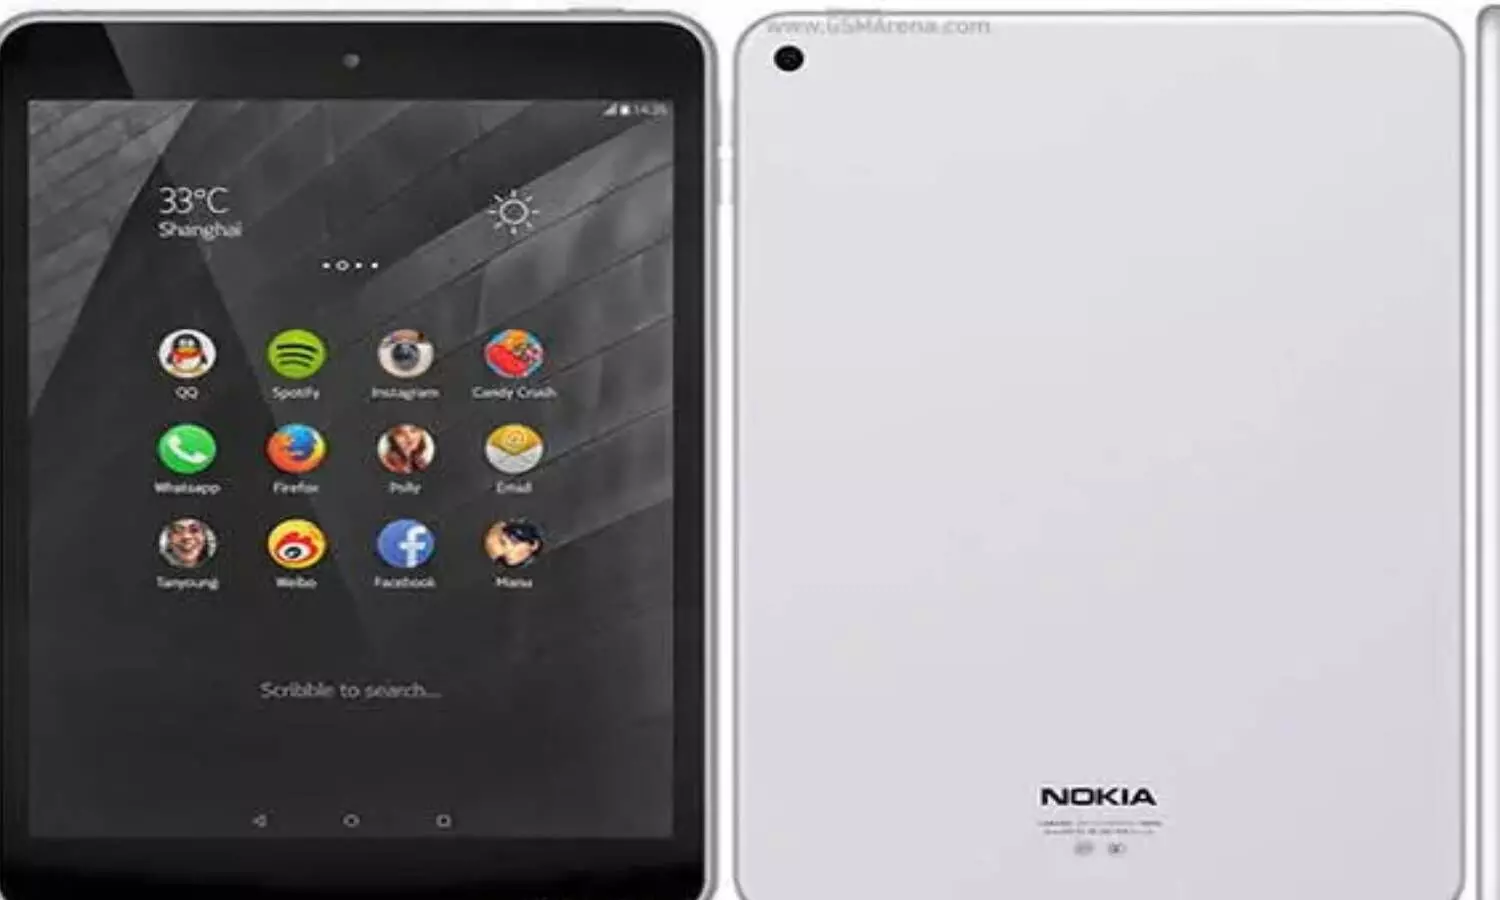 Nokia flaunts new Android tablet on social media